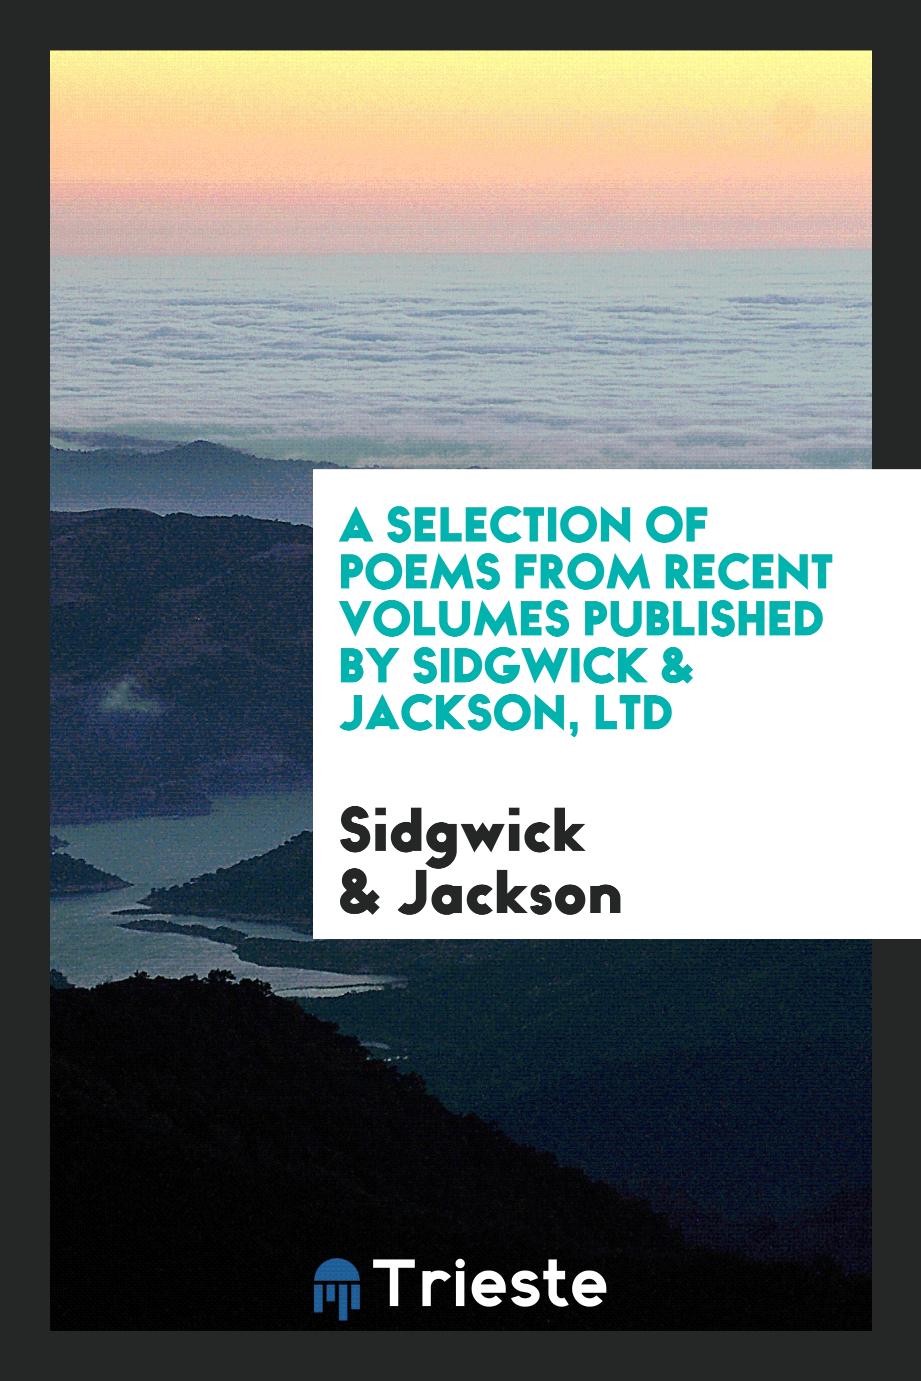 A selection of poems from recent volumes published by Sidgwick & Jackson, Ltd